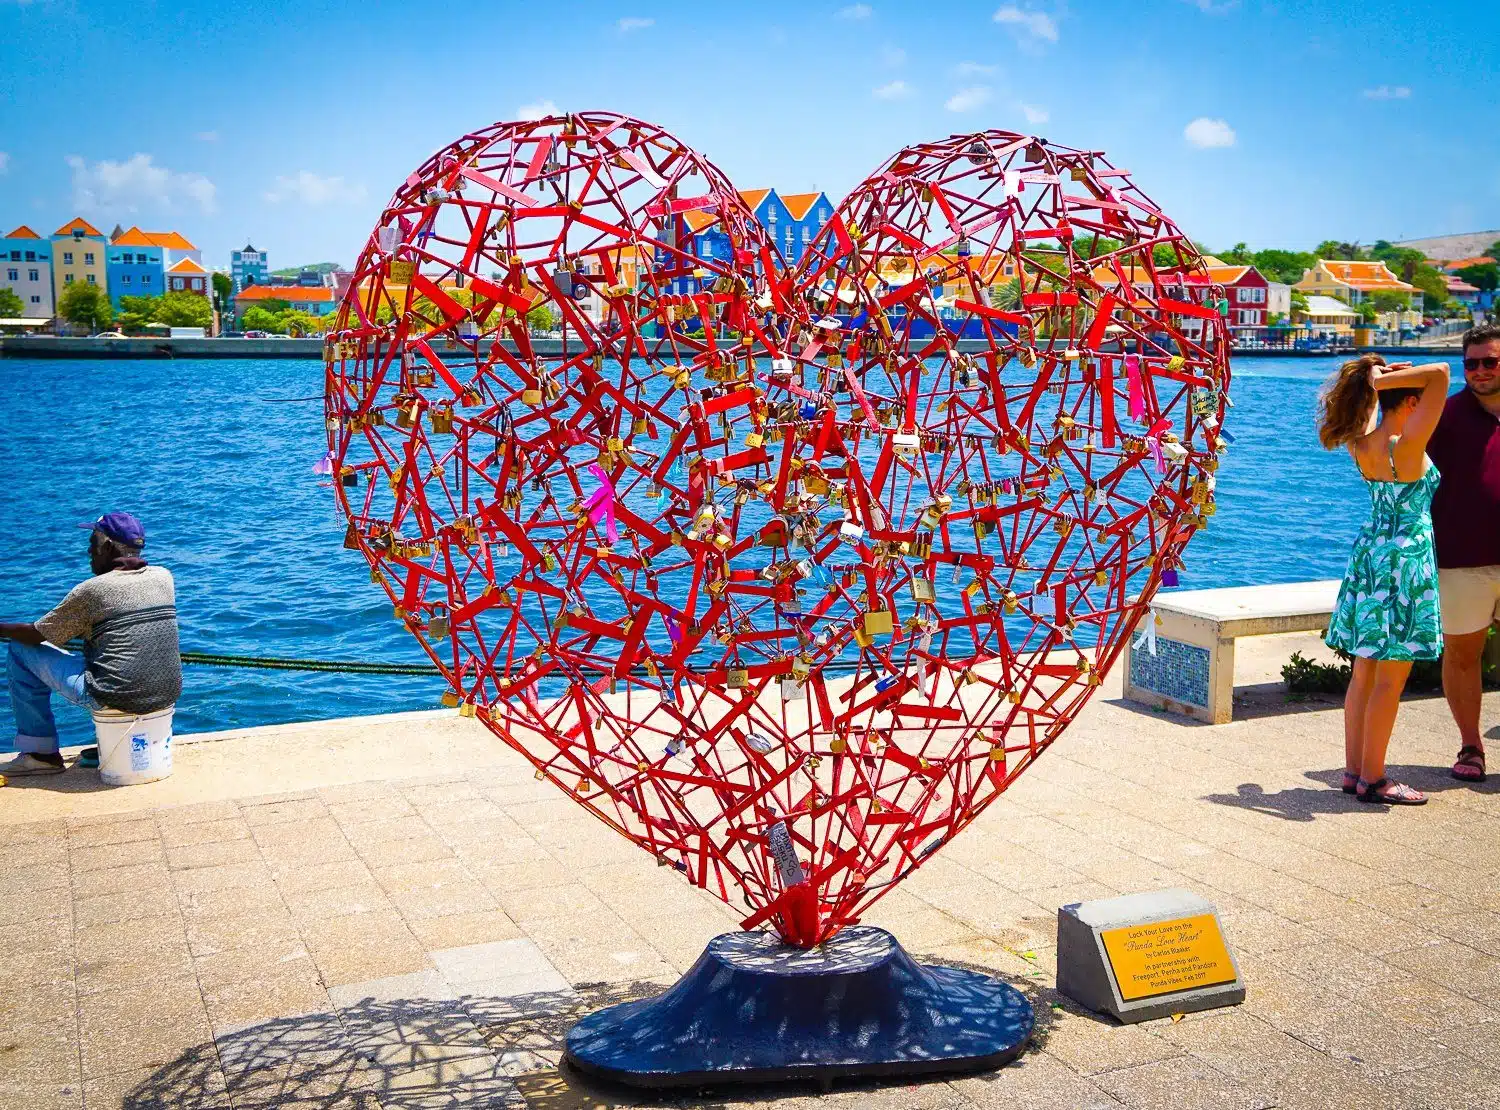 Heart art by Willemstad's waterfront.